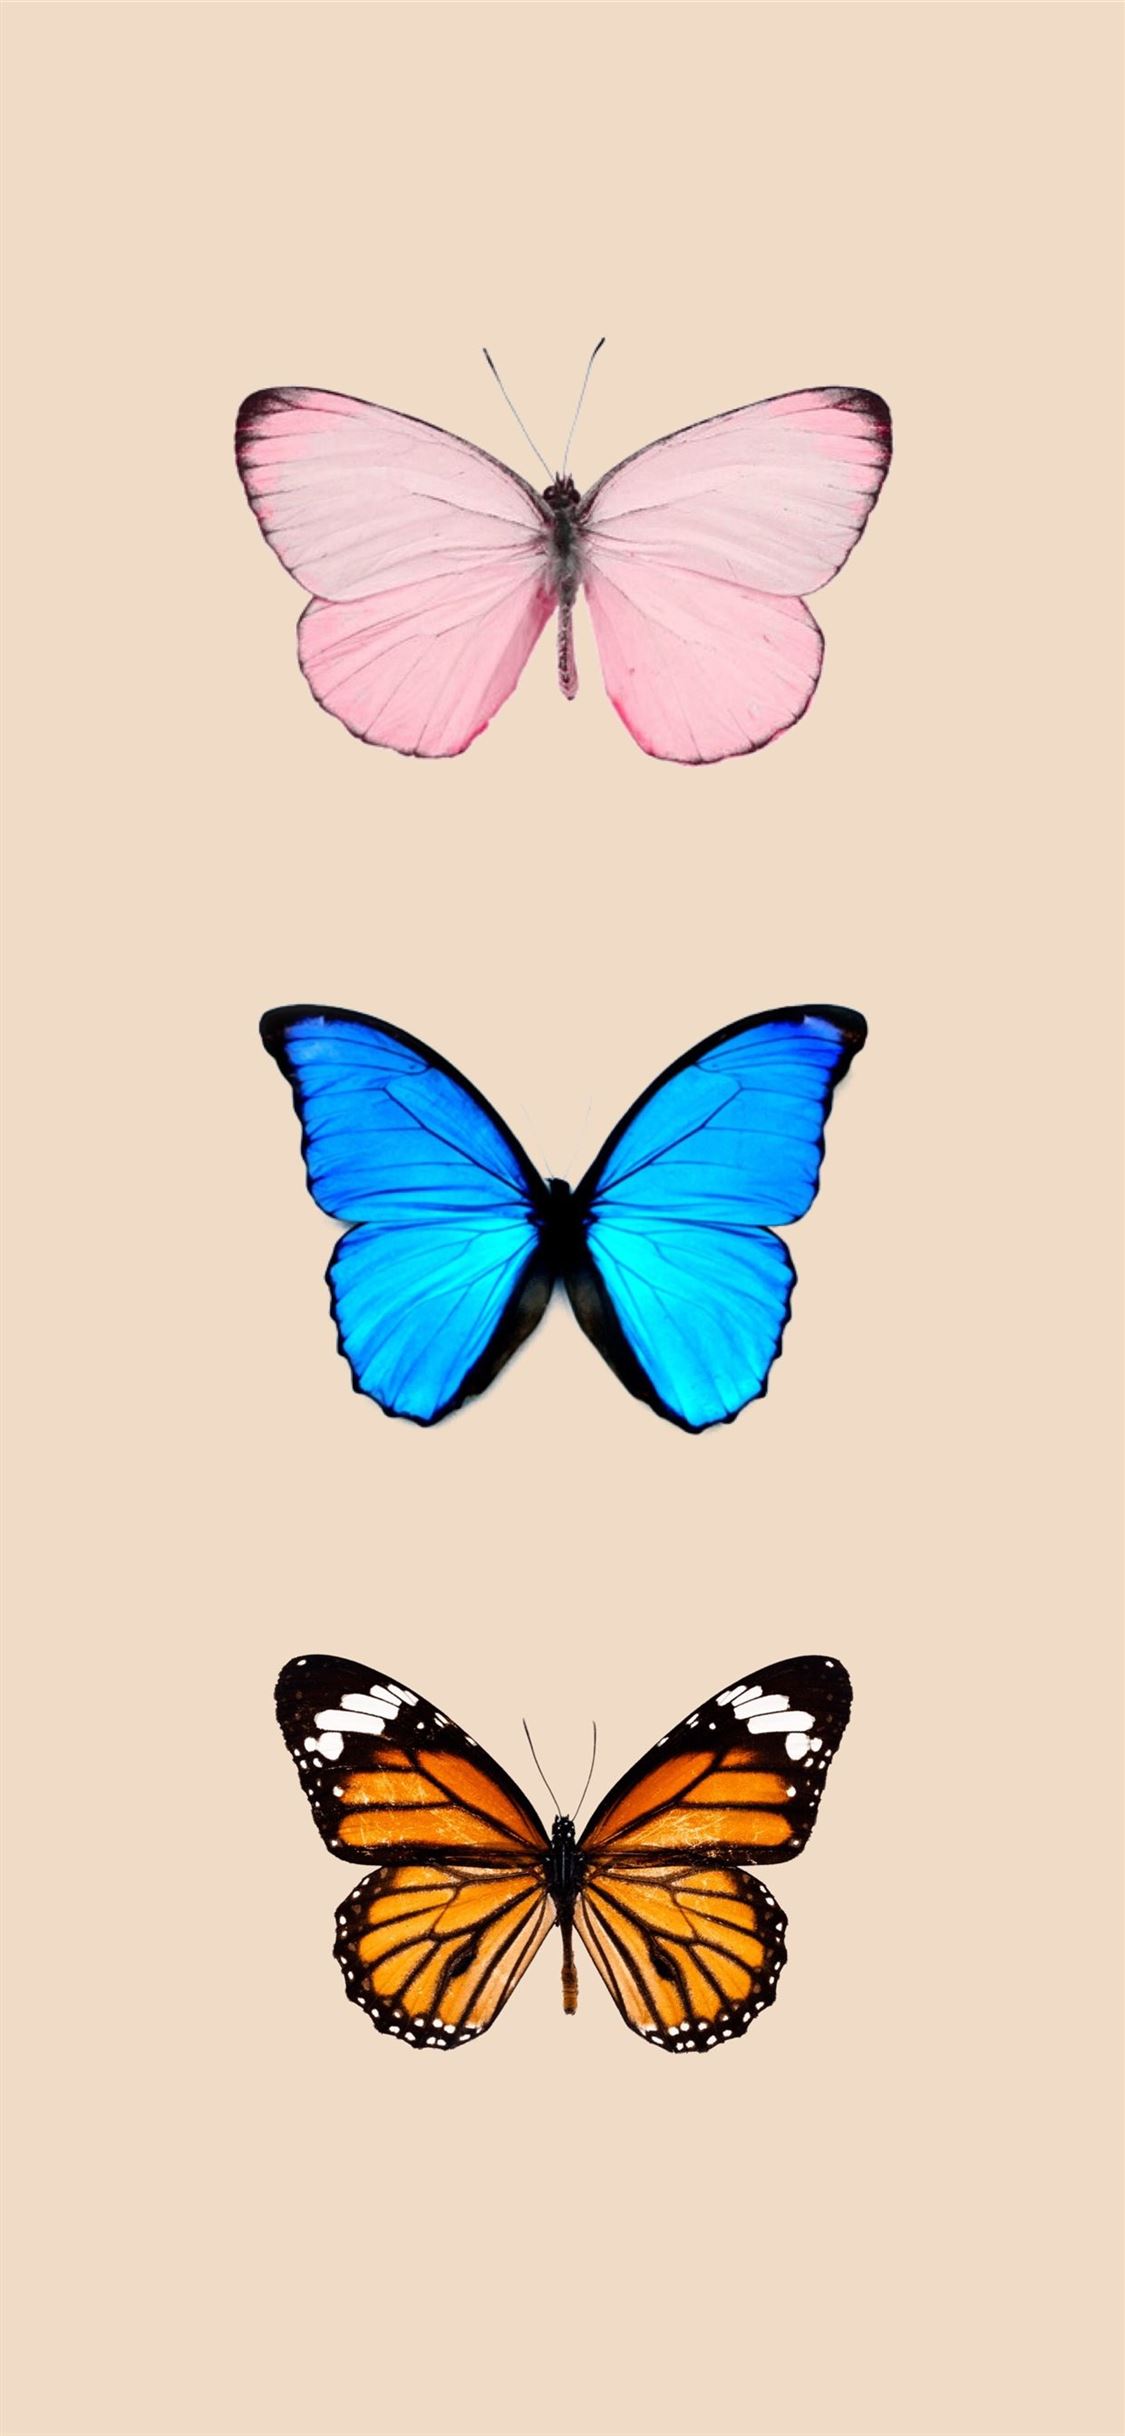 Butterfly background iPhone iPhone X Wallpaper Free Download